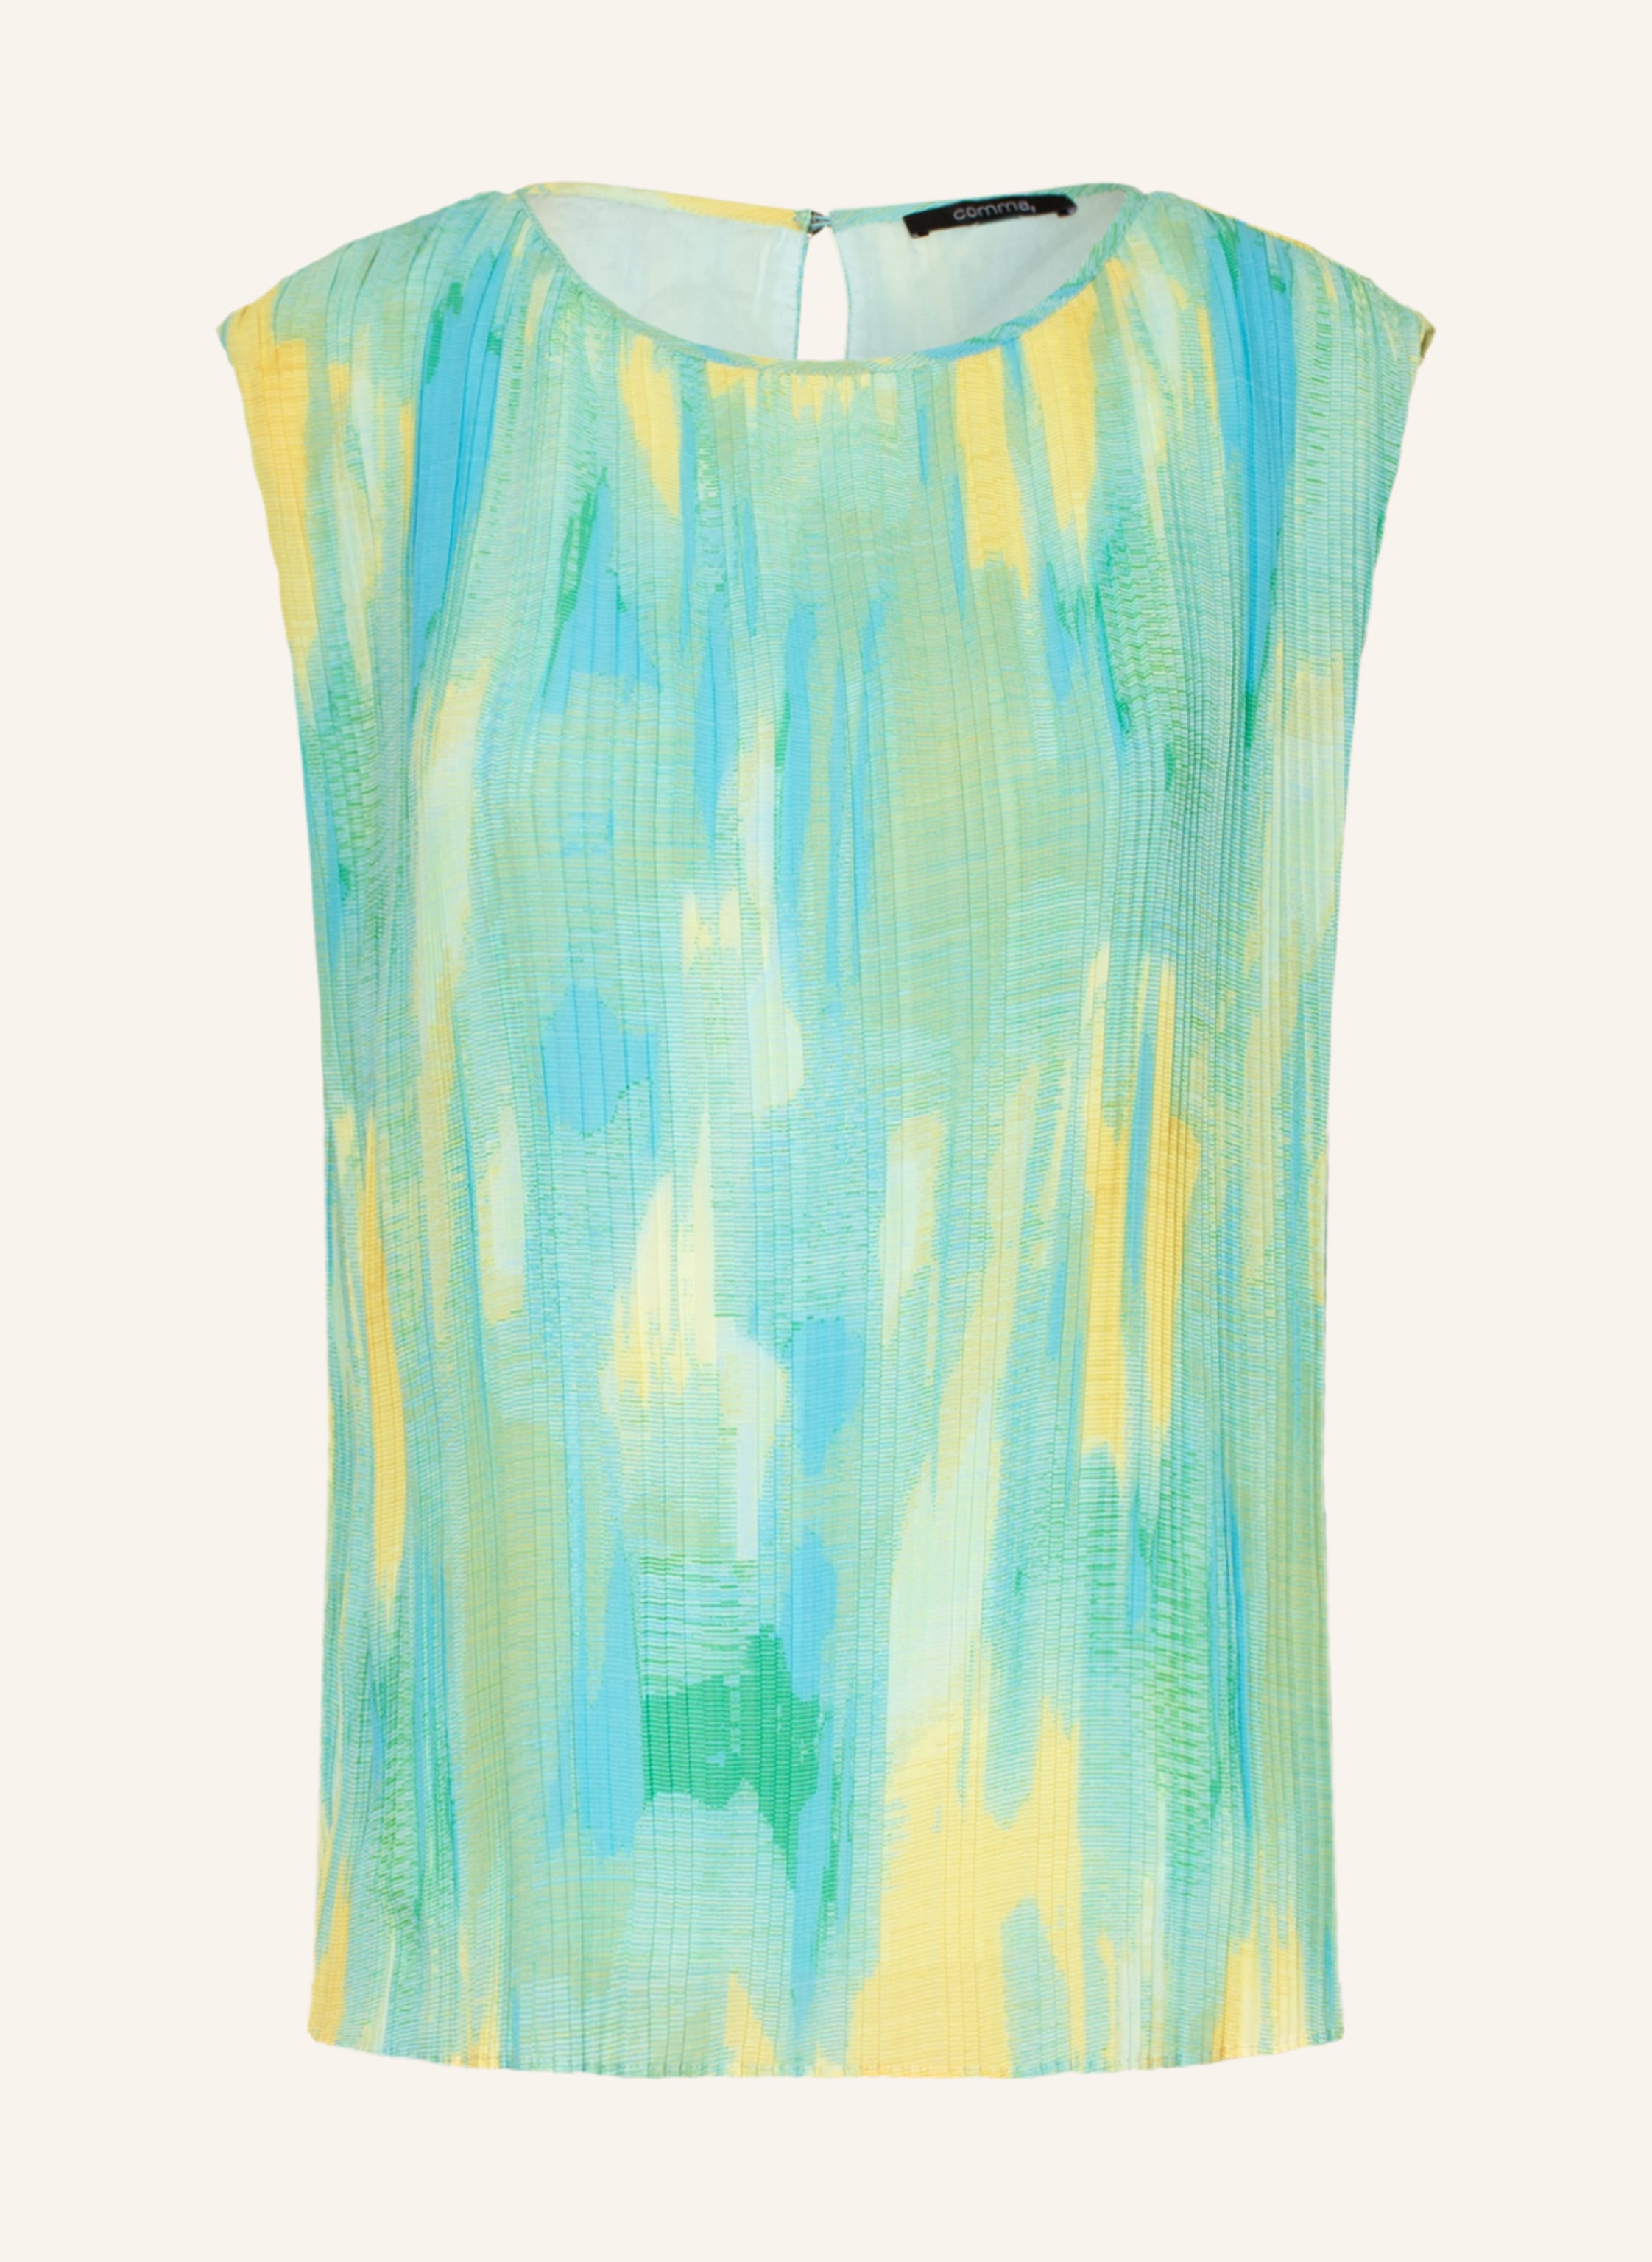 comma Pleated top in light yellow turquoise/ green